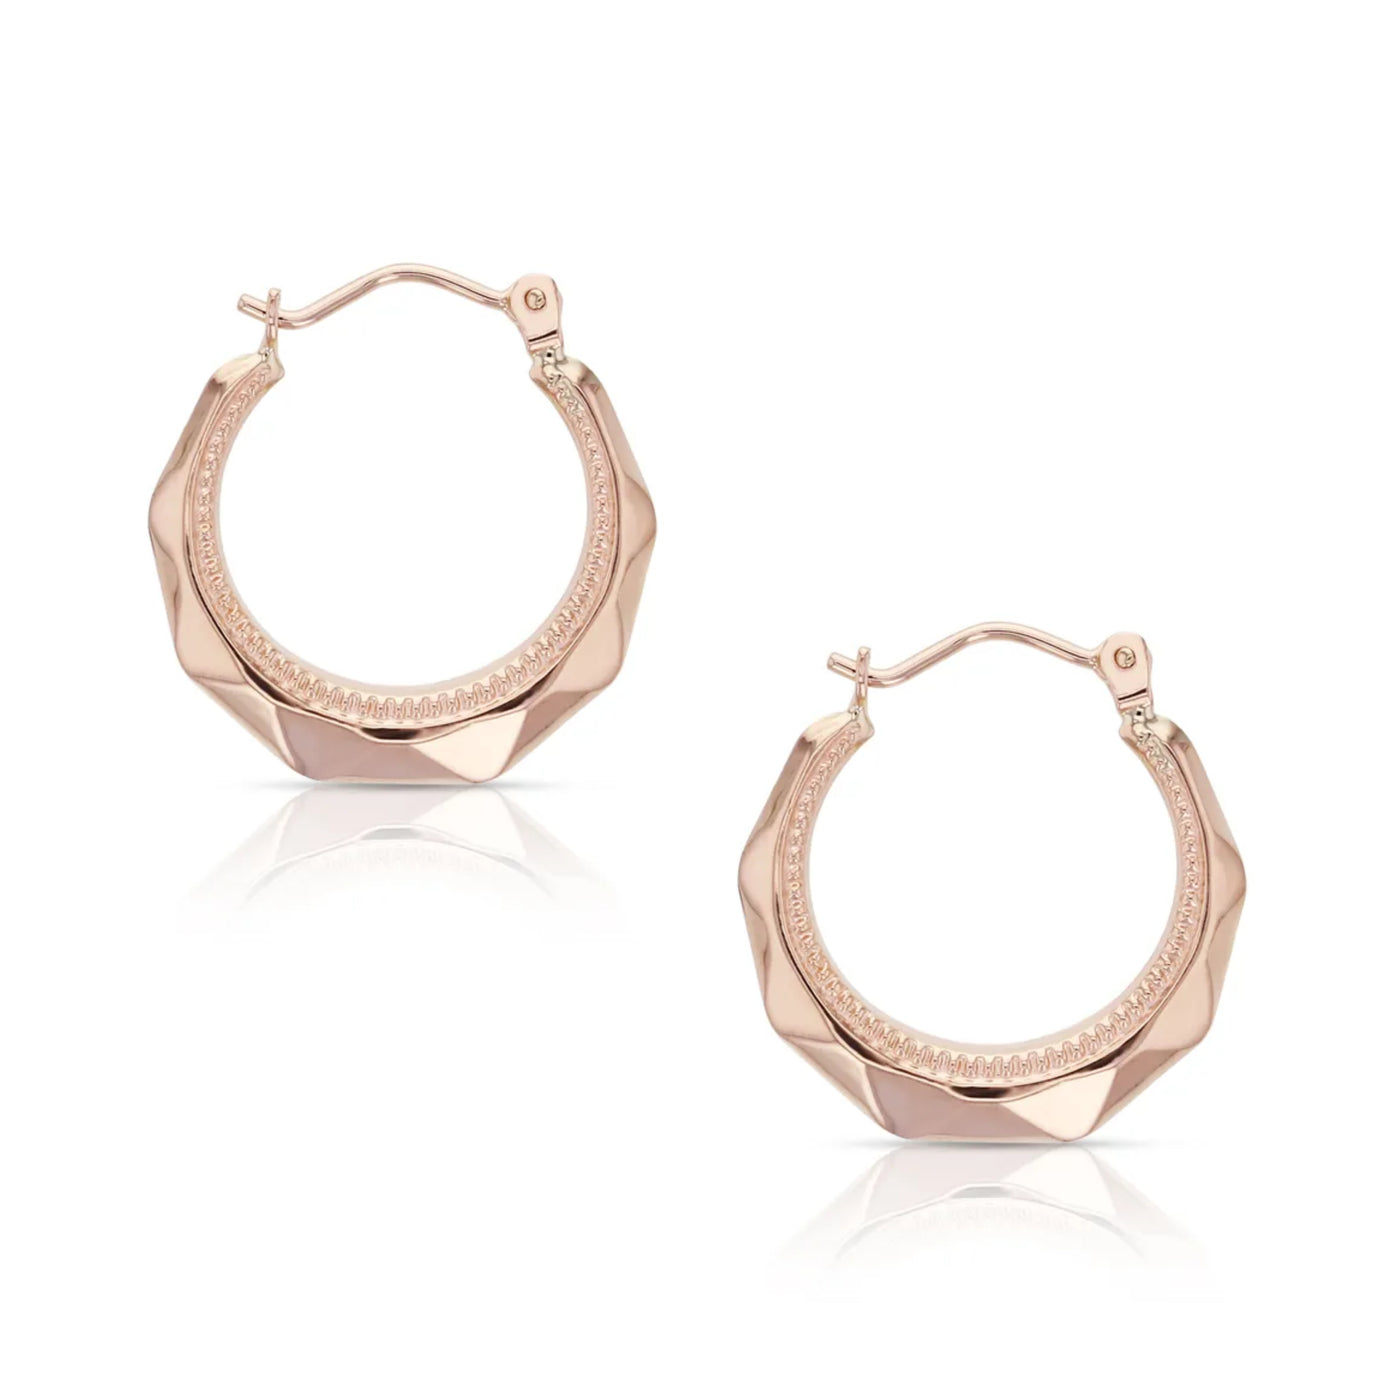 9ct Rose Gold Faceted Crescent Shape Hoop Earrings.